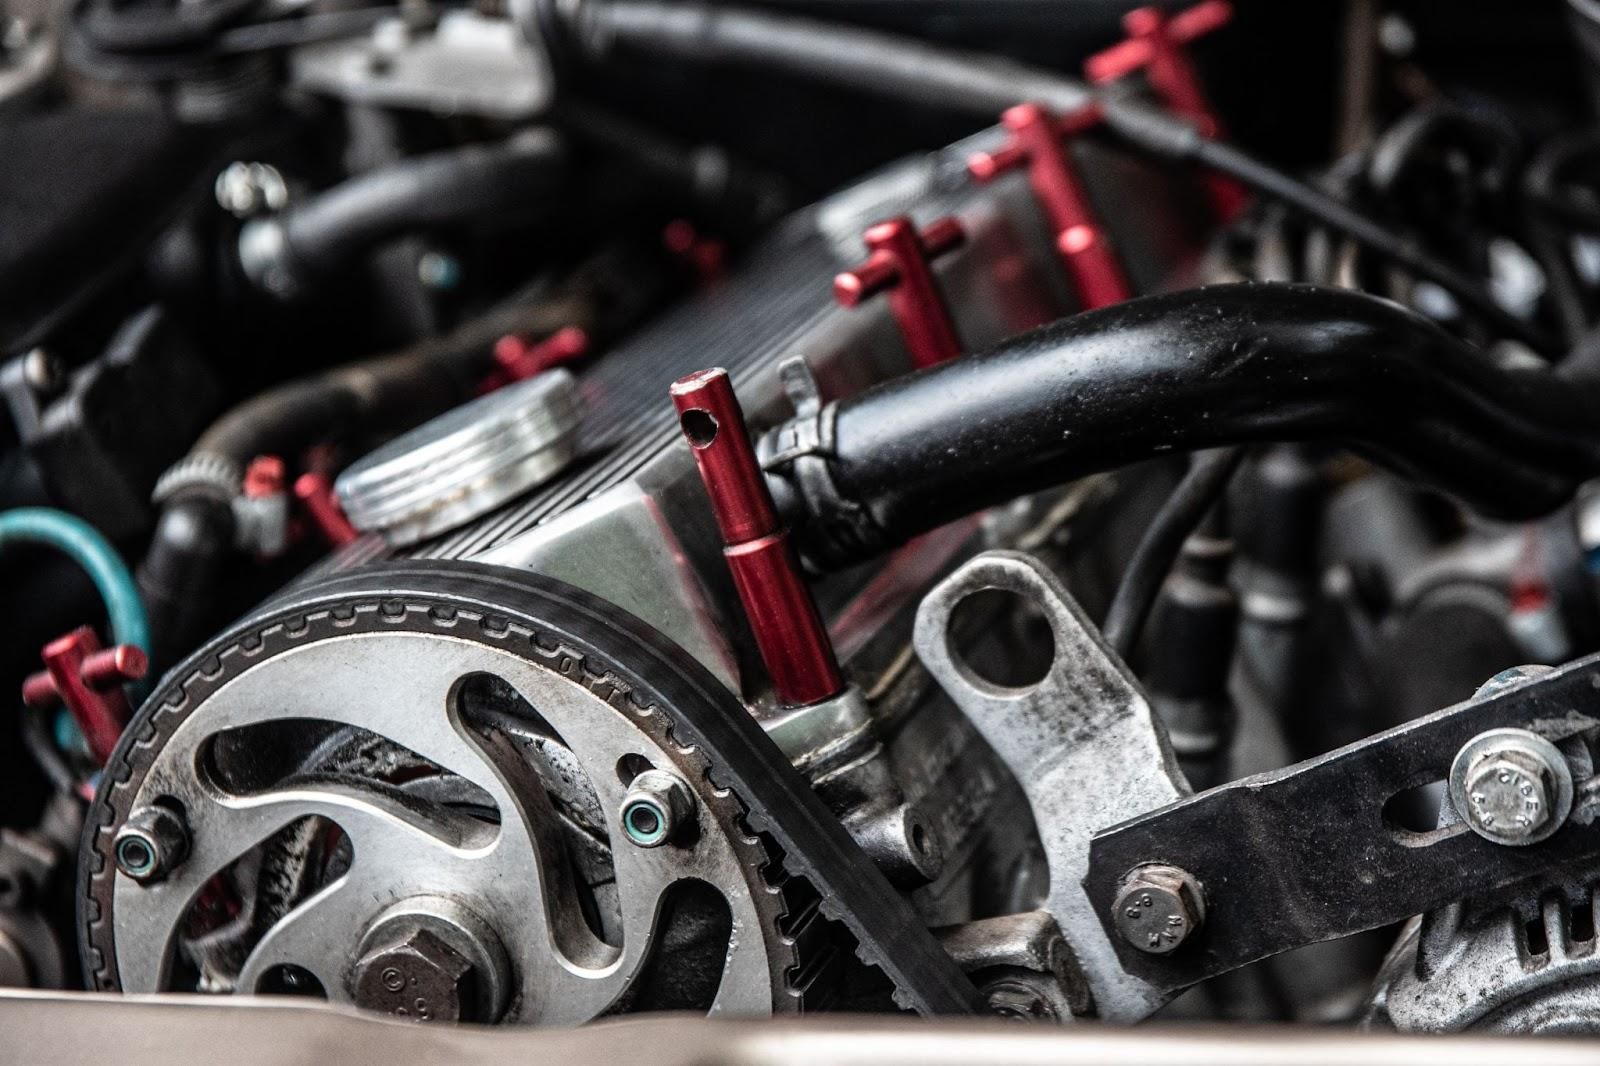 Timing Belt Service at ﻿Terry's Automotive Group﻿ in ﻿Olympia, WA﻿